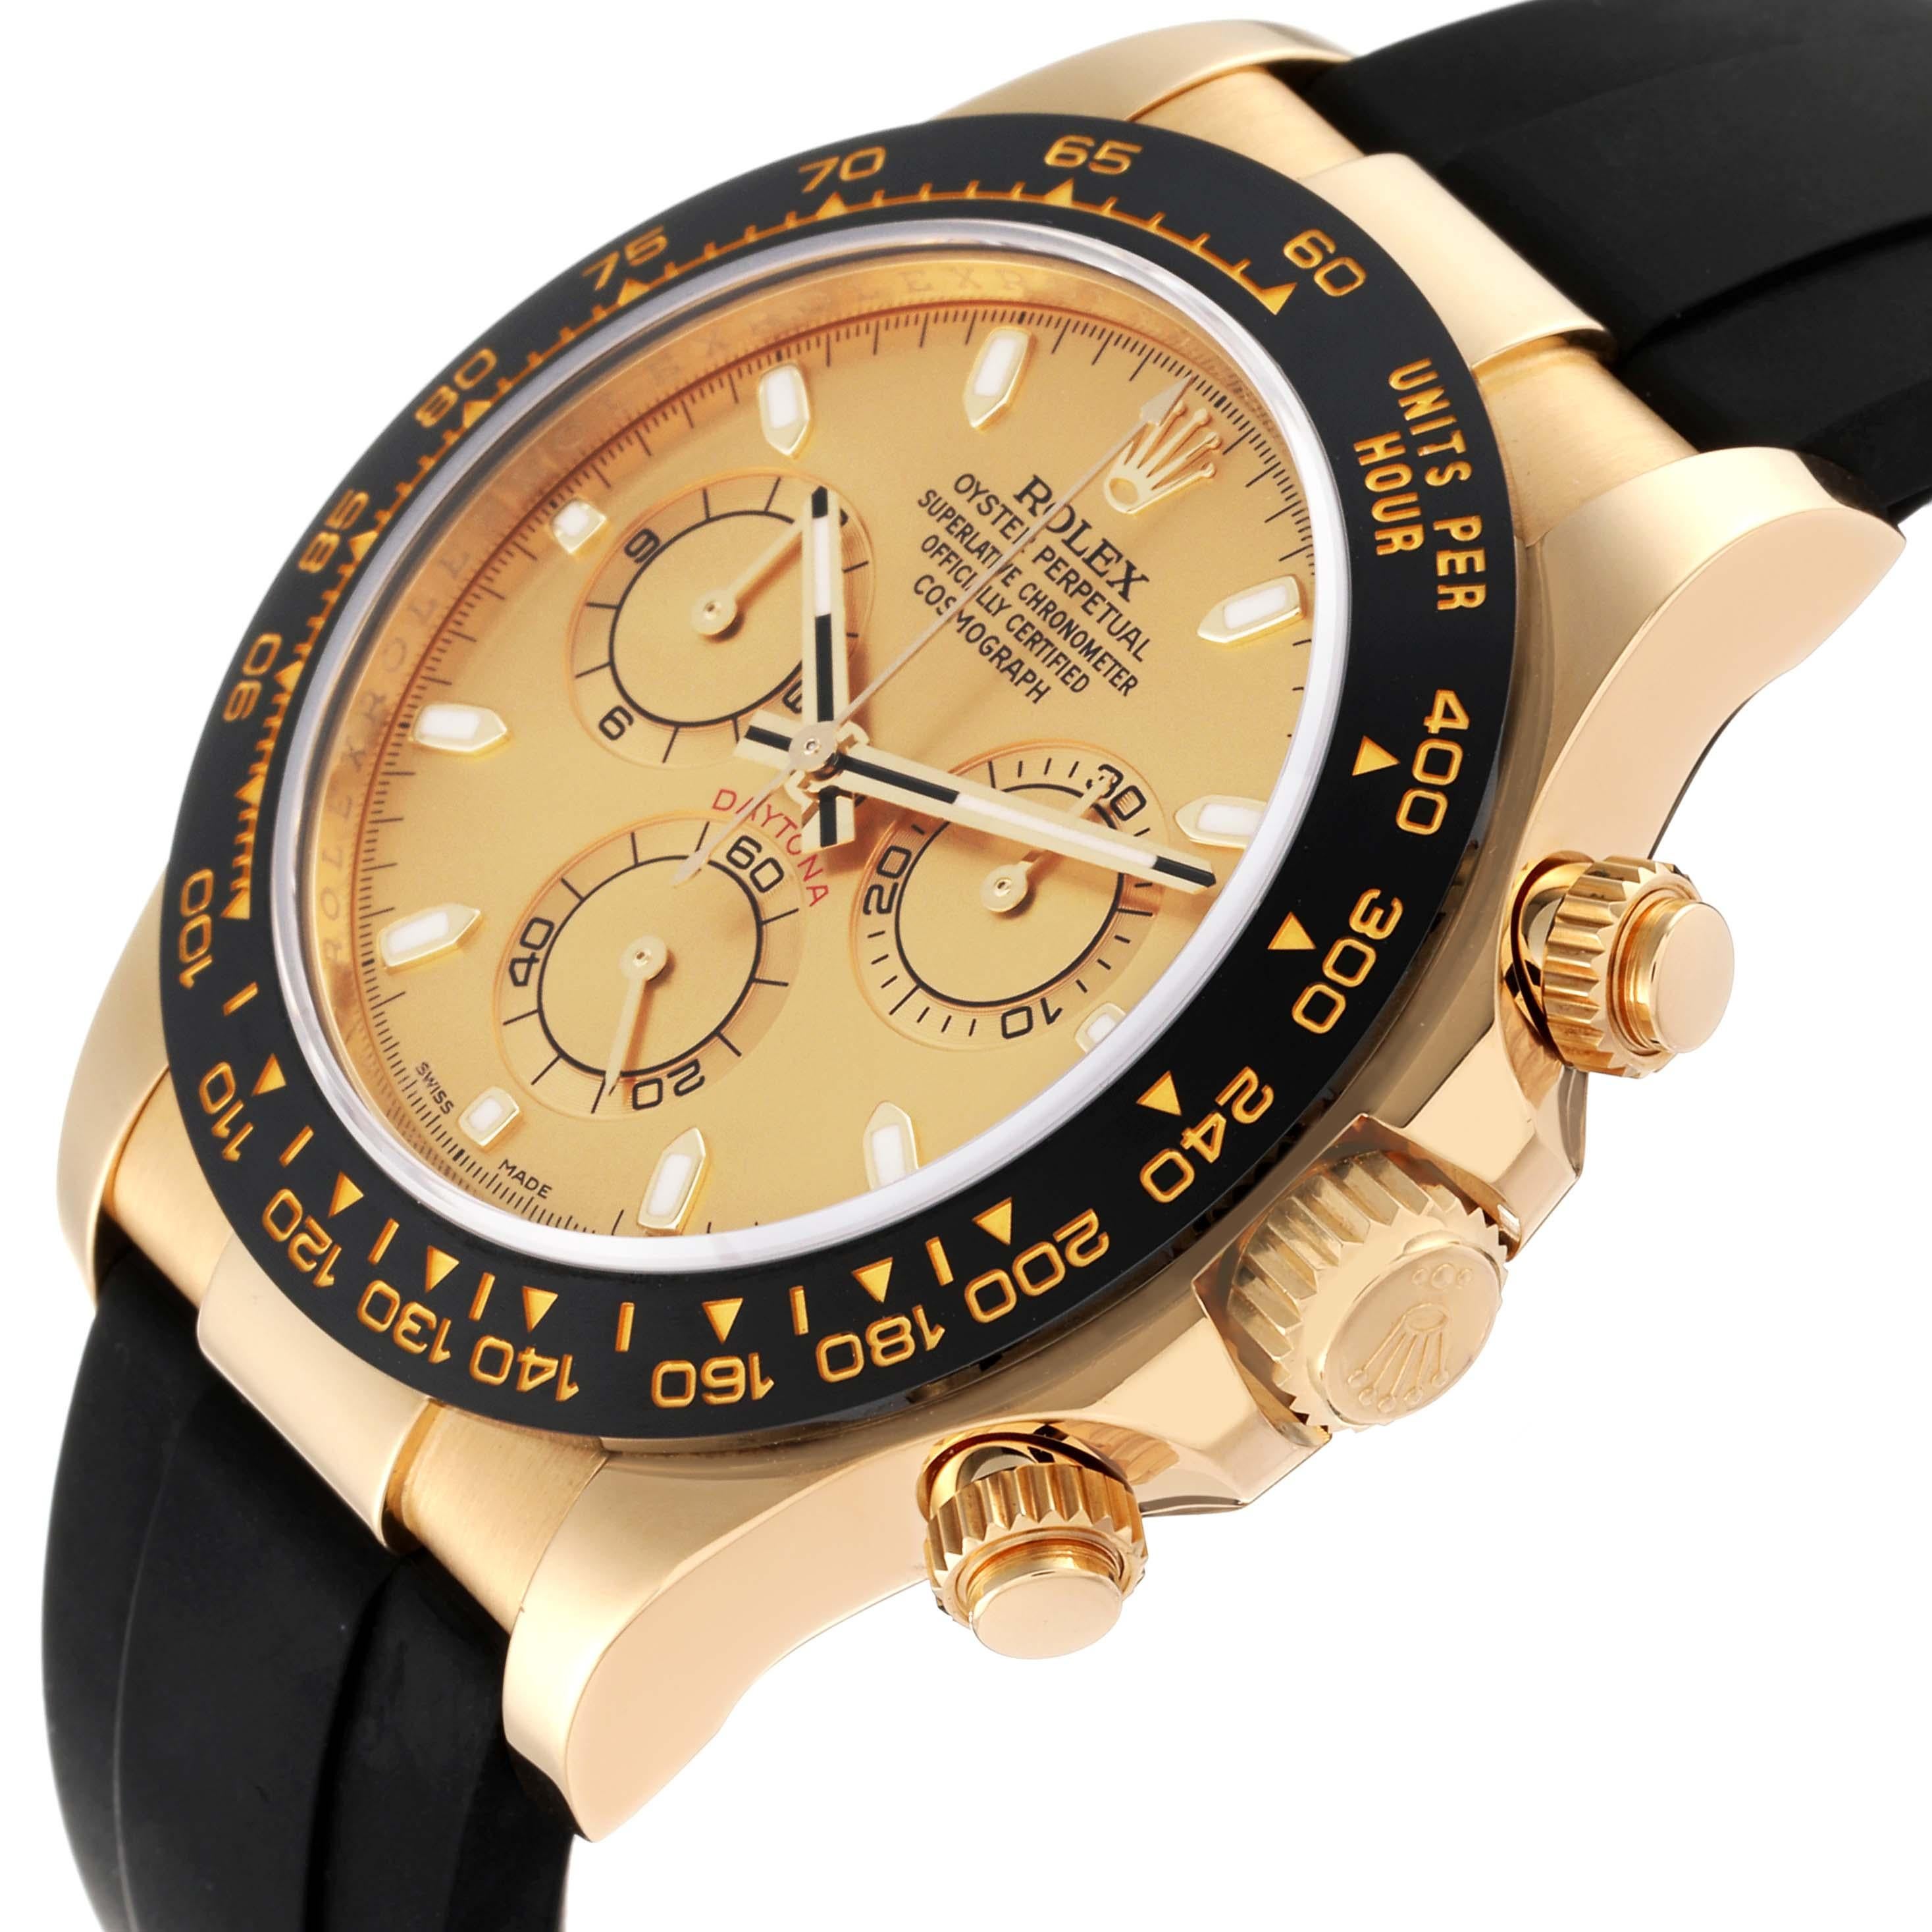 Rolex Daytona Yellow Gold Champagne Dial Mens Watch 116518 Box Card For Sale 1